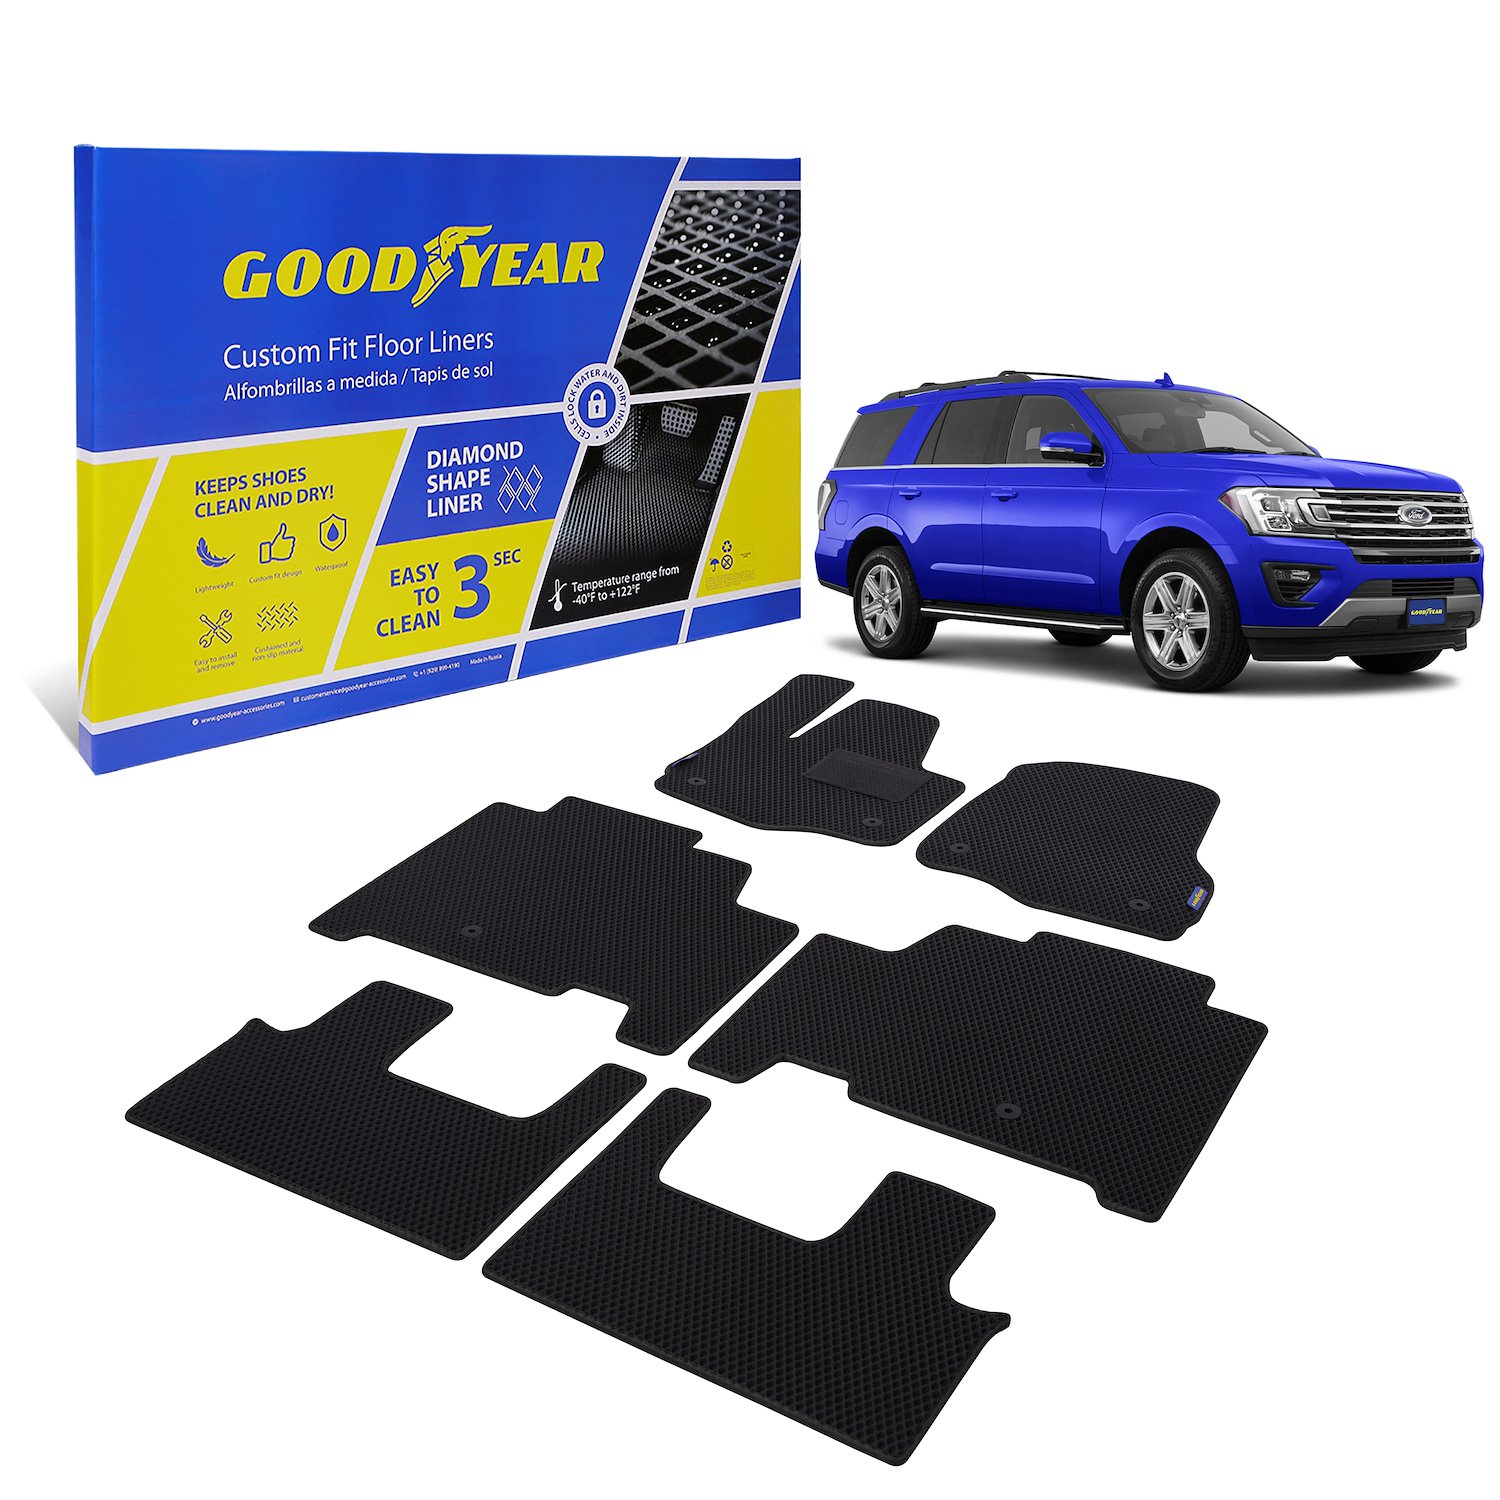 Goodyear Custom-Fit Floor Liners Fits Select Ford Expedition/Lincoln Navigator